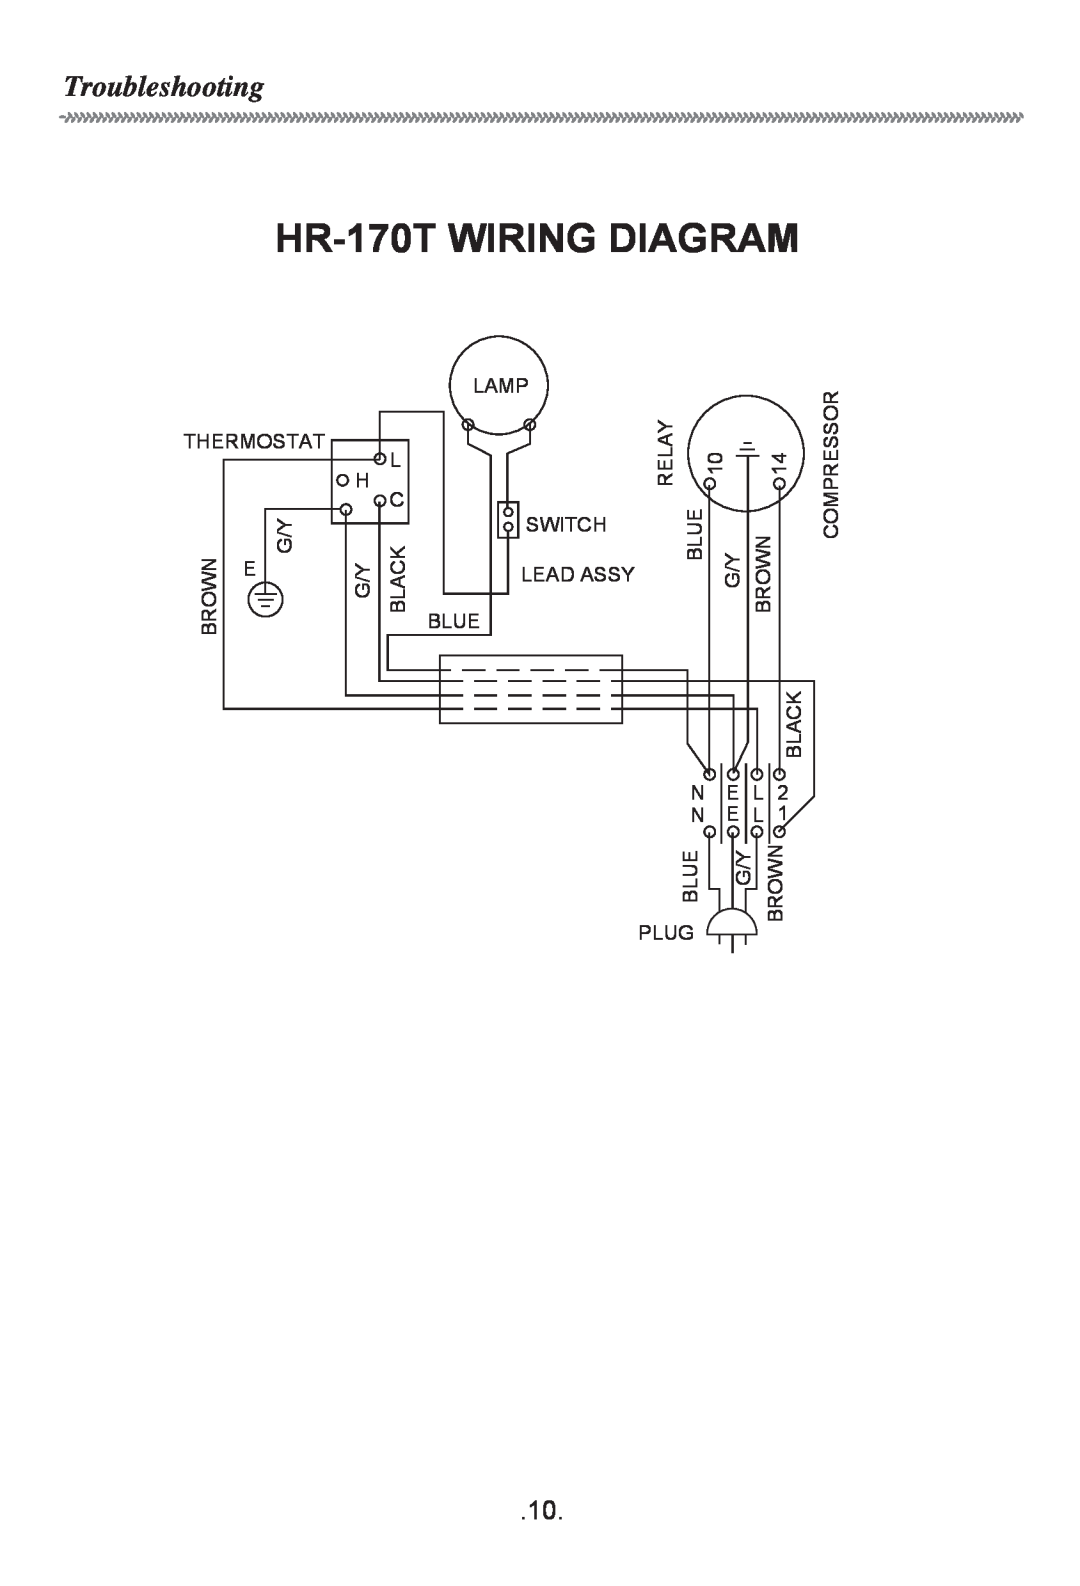 Haier HR-170T WIRING DIAGRAM, Troubleshooting, Thermostat G/Y, Lamp, Brown, Compressor, Relay Blue, Switch, Lead Assy 